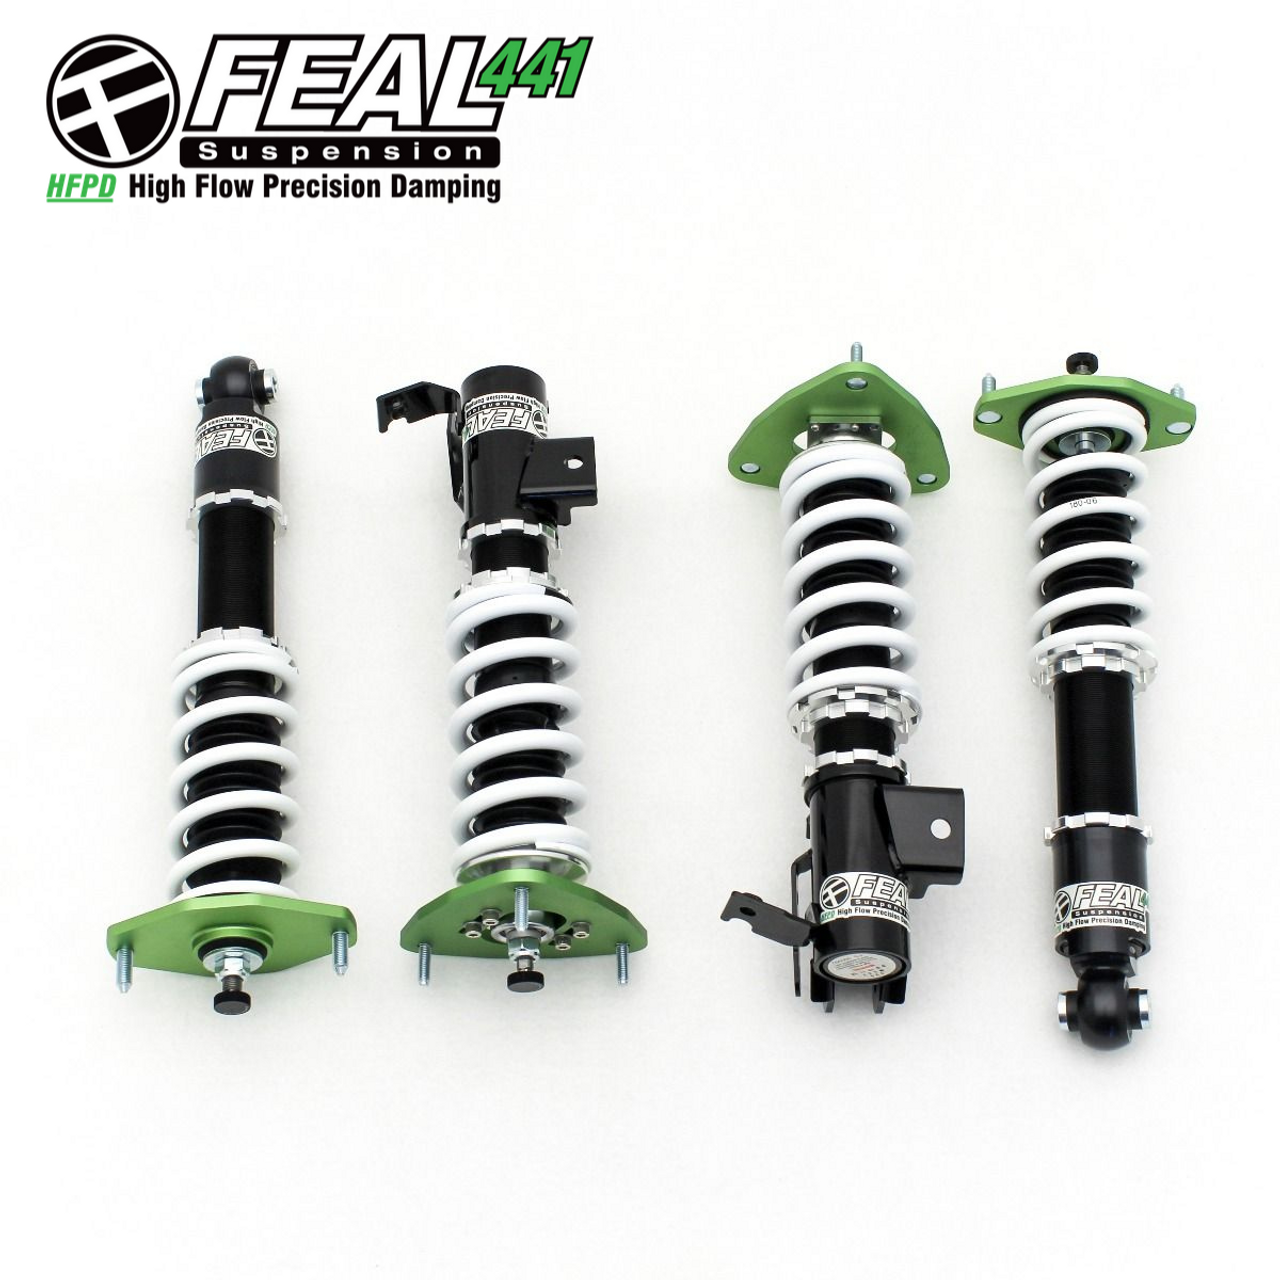 Feal Suspension 441 Coilovers - 2012 - 2021 BRZ/FRS/GT86/GR86